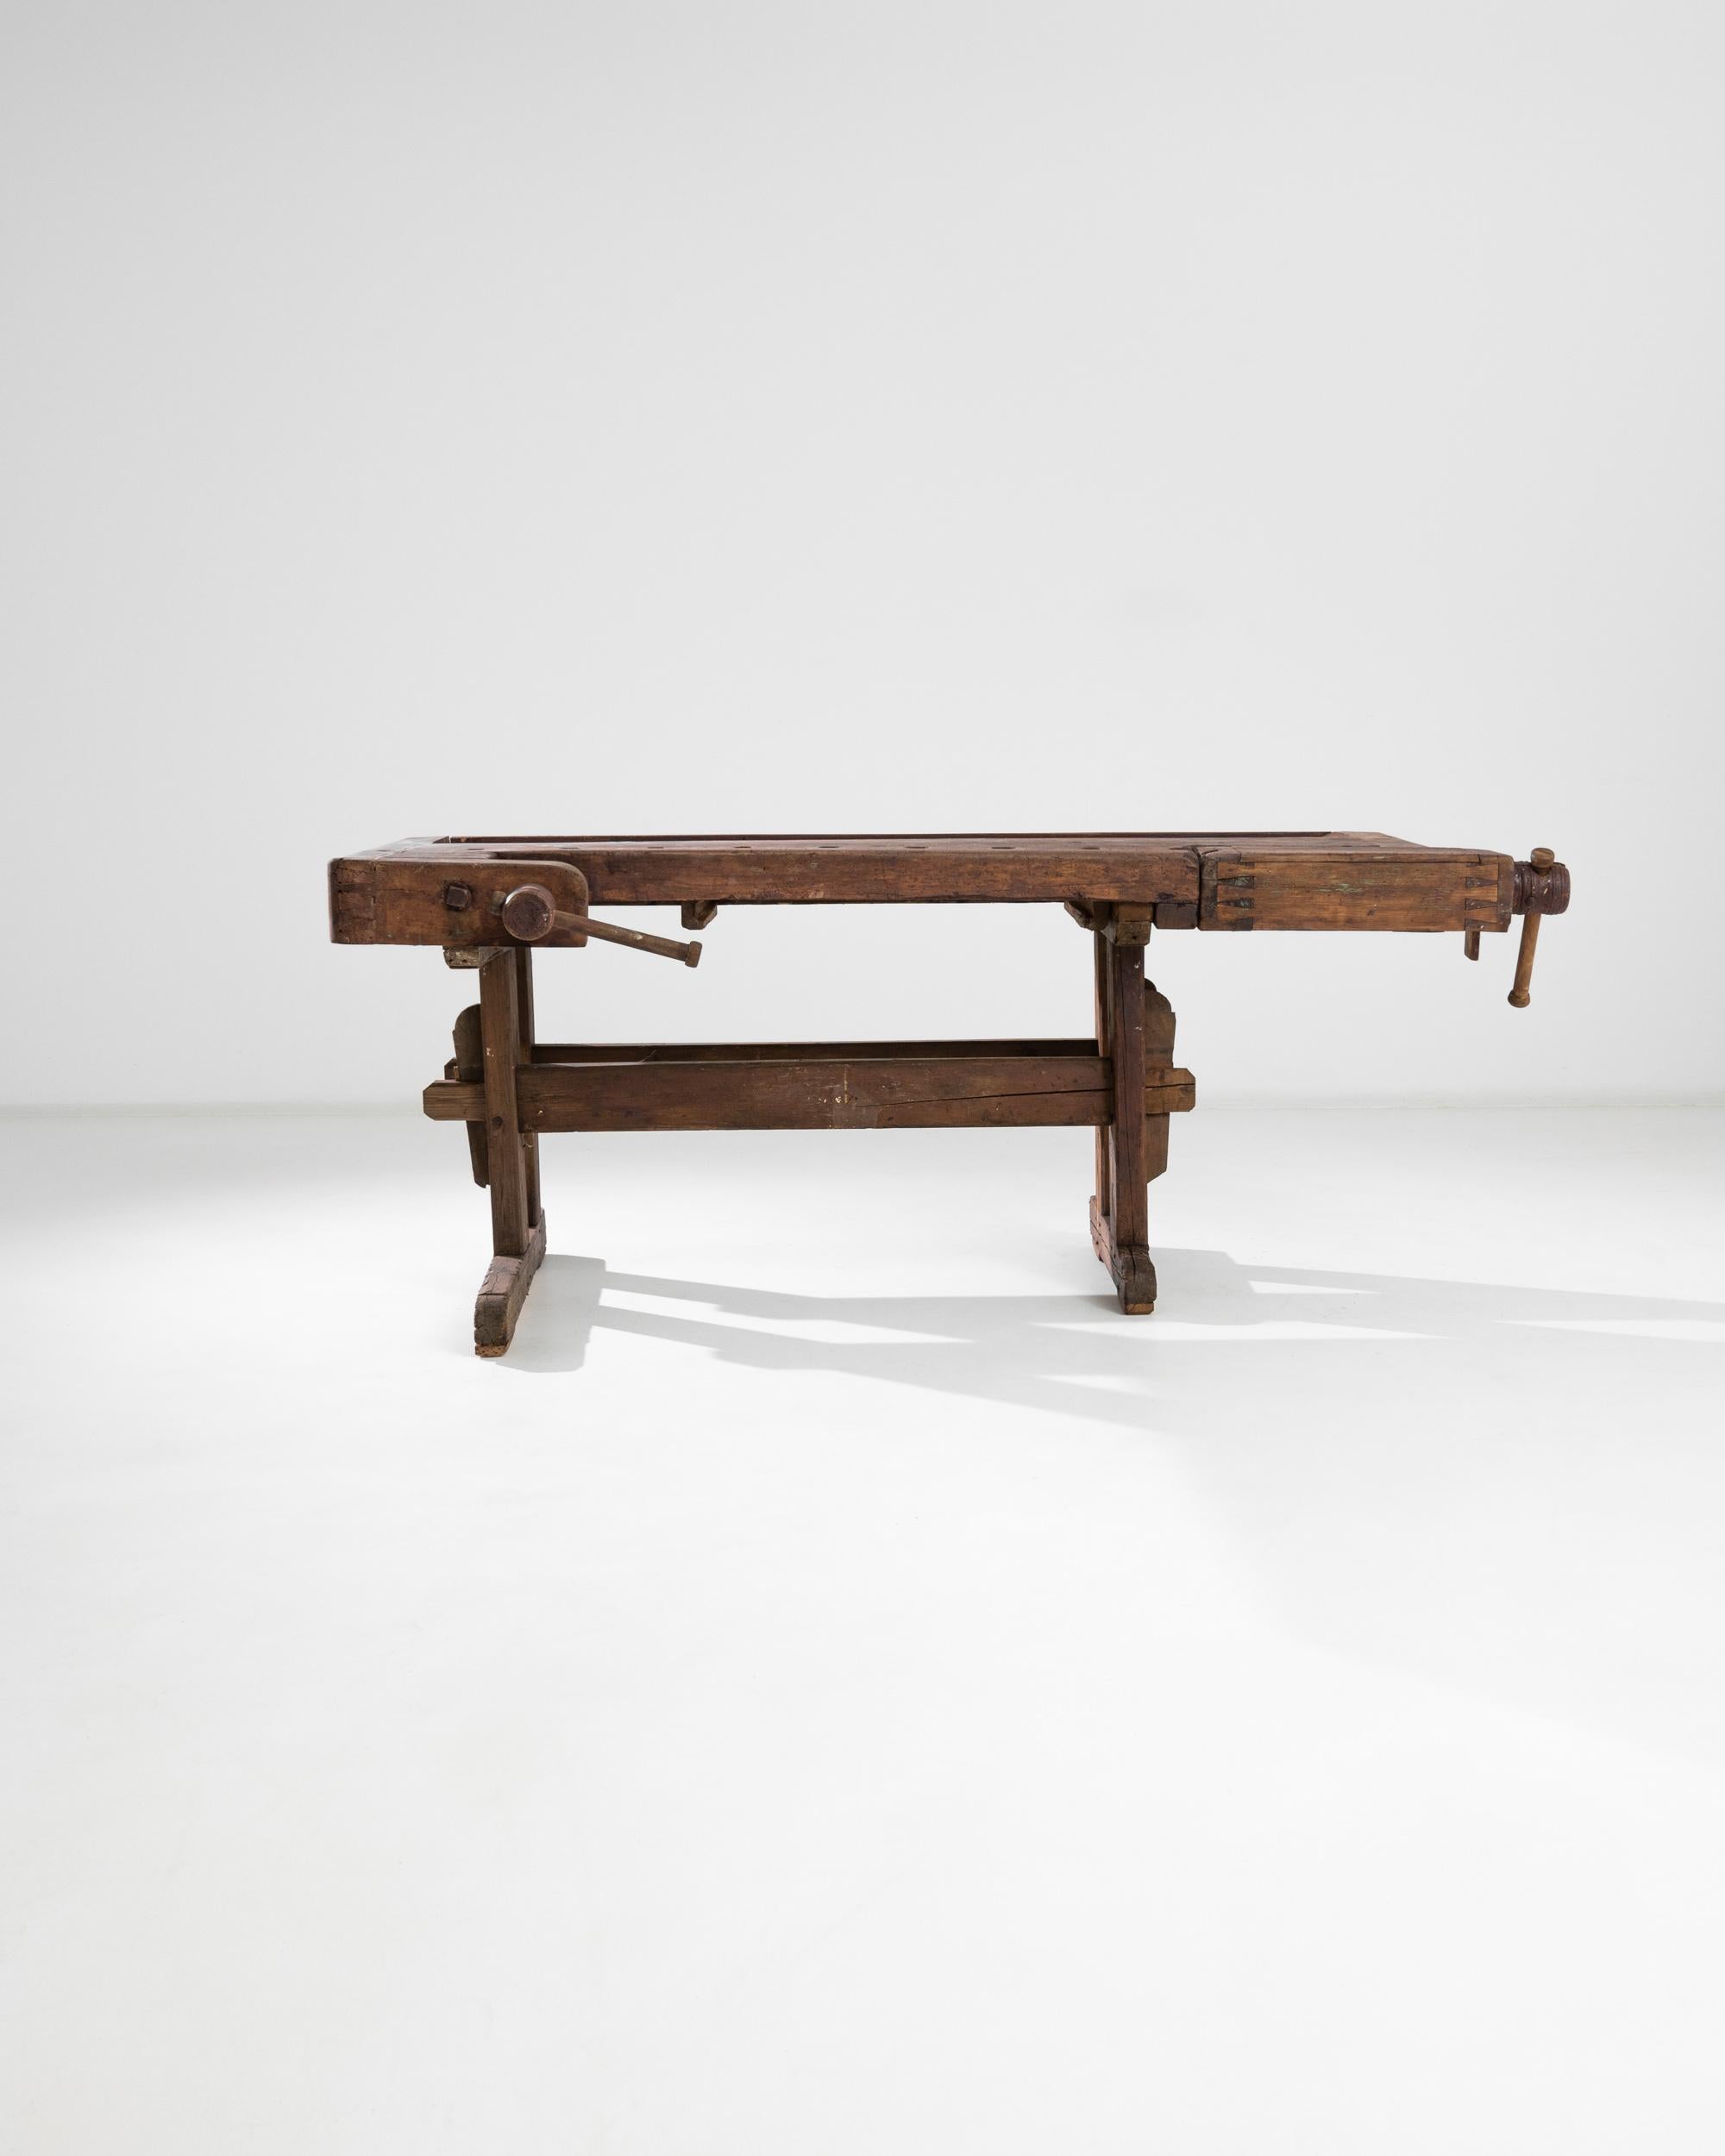 A vintage Central European wooden work table. A gentle giant, this pleasantly asymmetrical work table offers function and time-tested style. Even with dovetailed joints and mortise and tenon legs this table understates its own gravitas, while